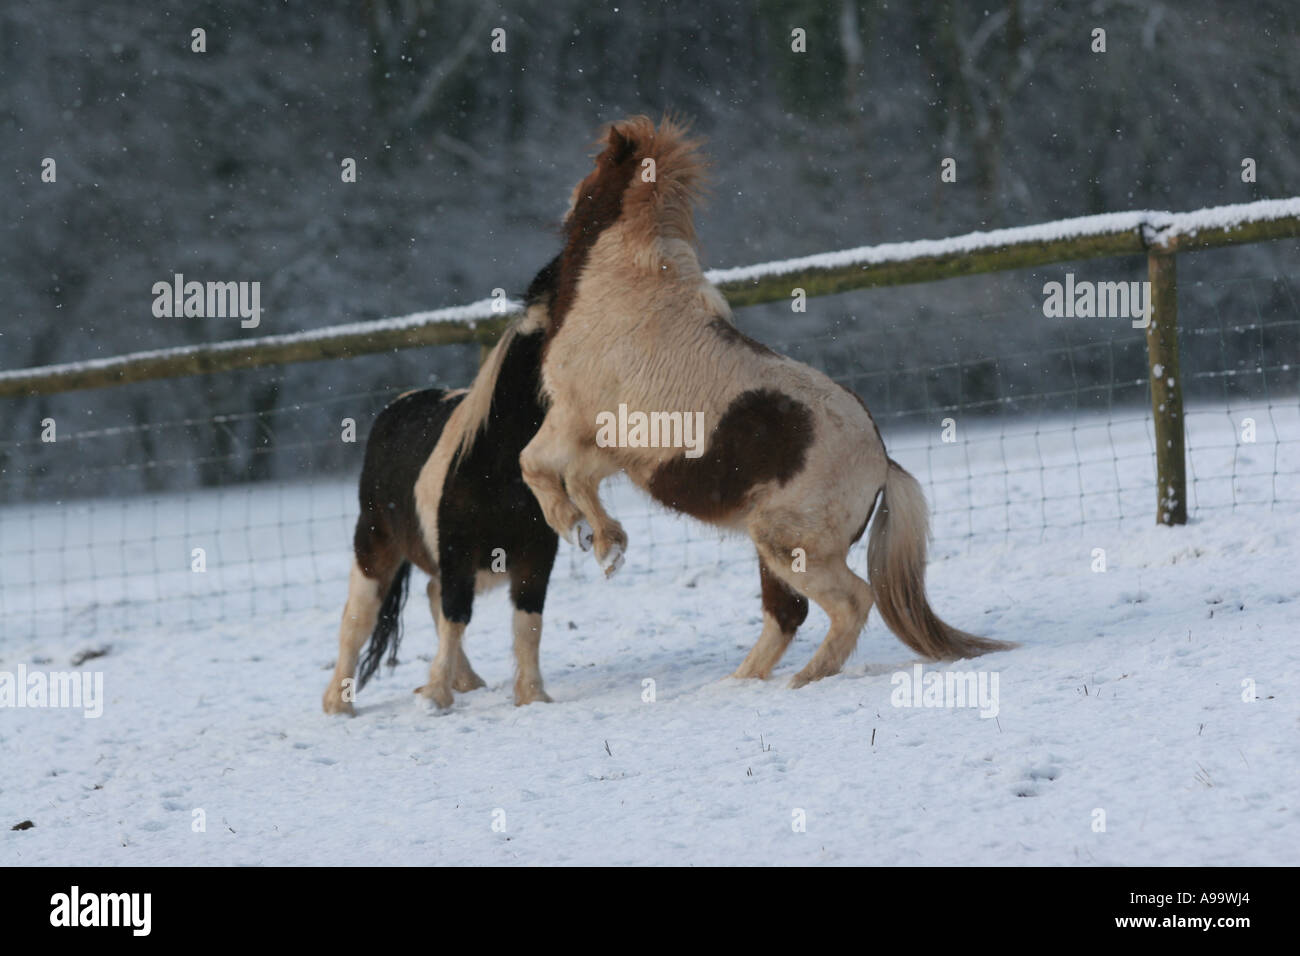 Miniature Horses in Snow Animal Natural World Environment Wales Stock Photo